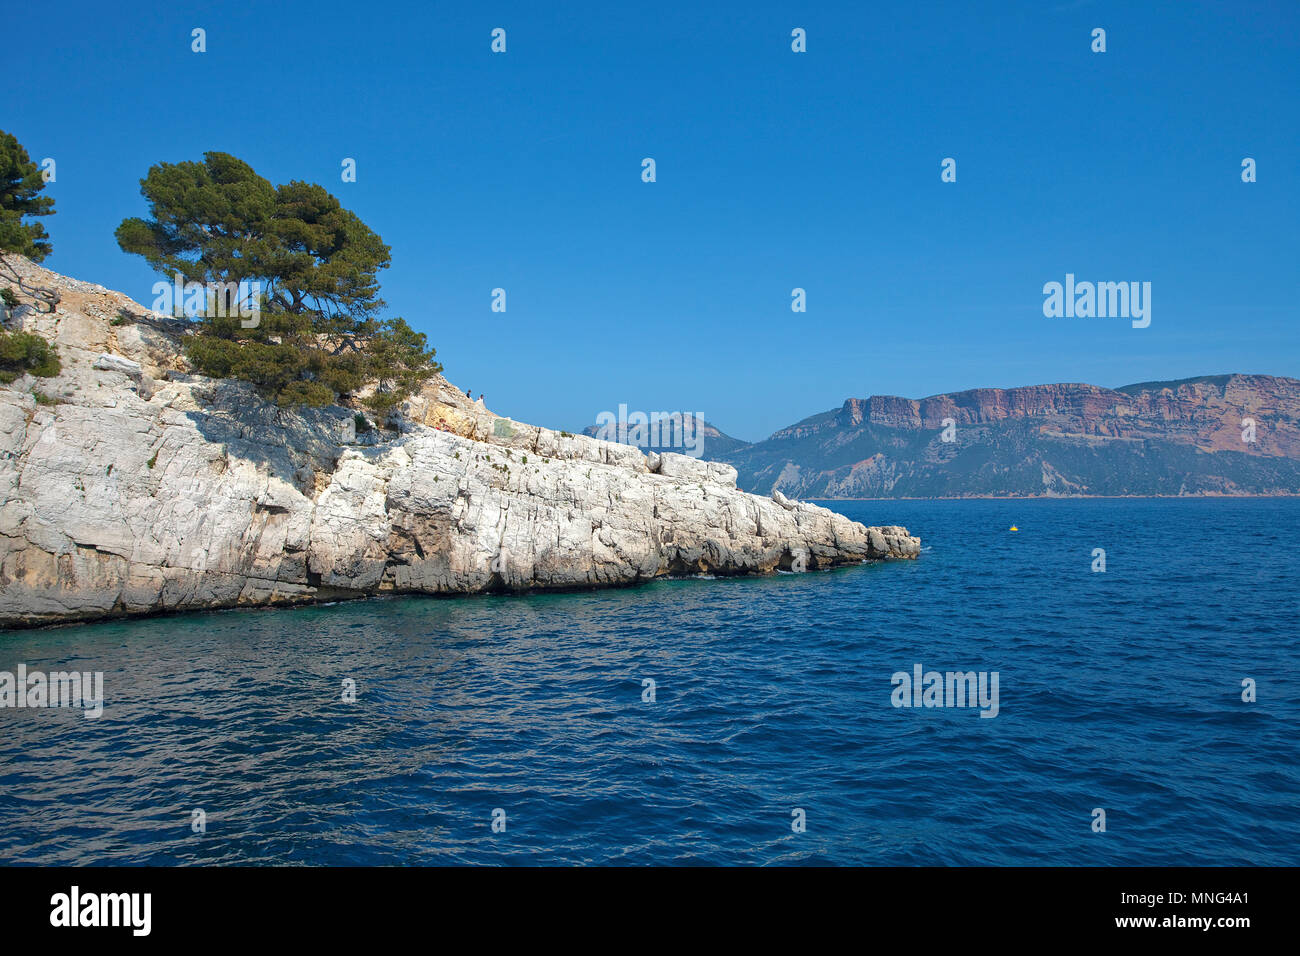 Pine tree on rock at Calanques, Bouches-du-Rhone, Côte d’Azur, South France, France, Europe Stock Photo